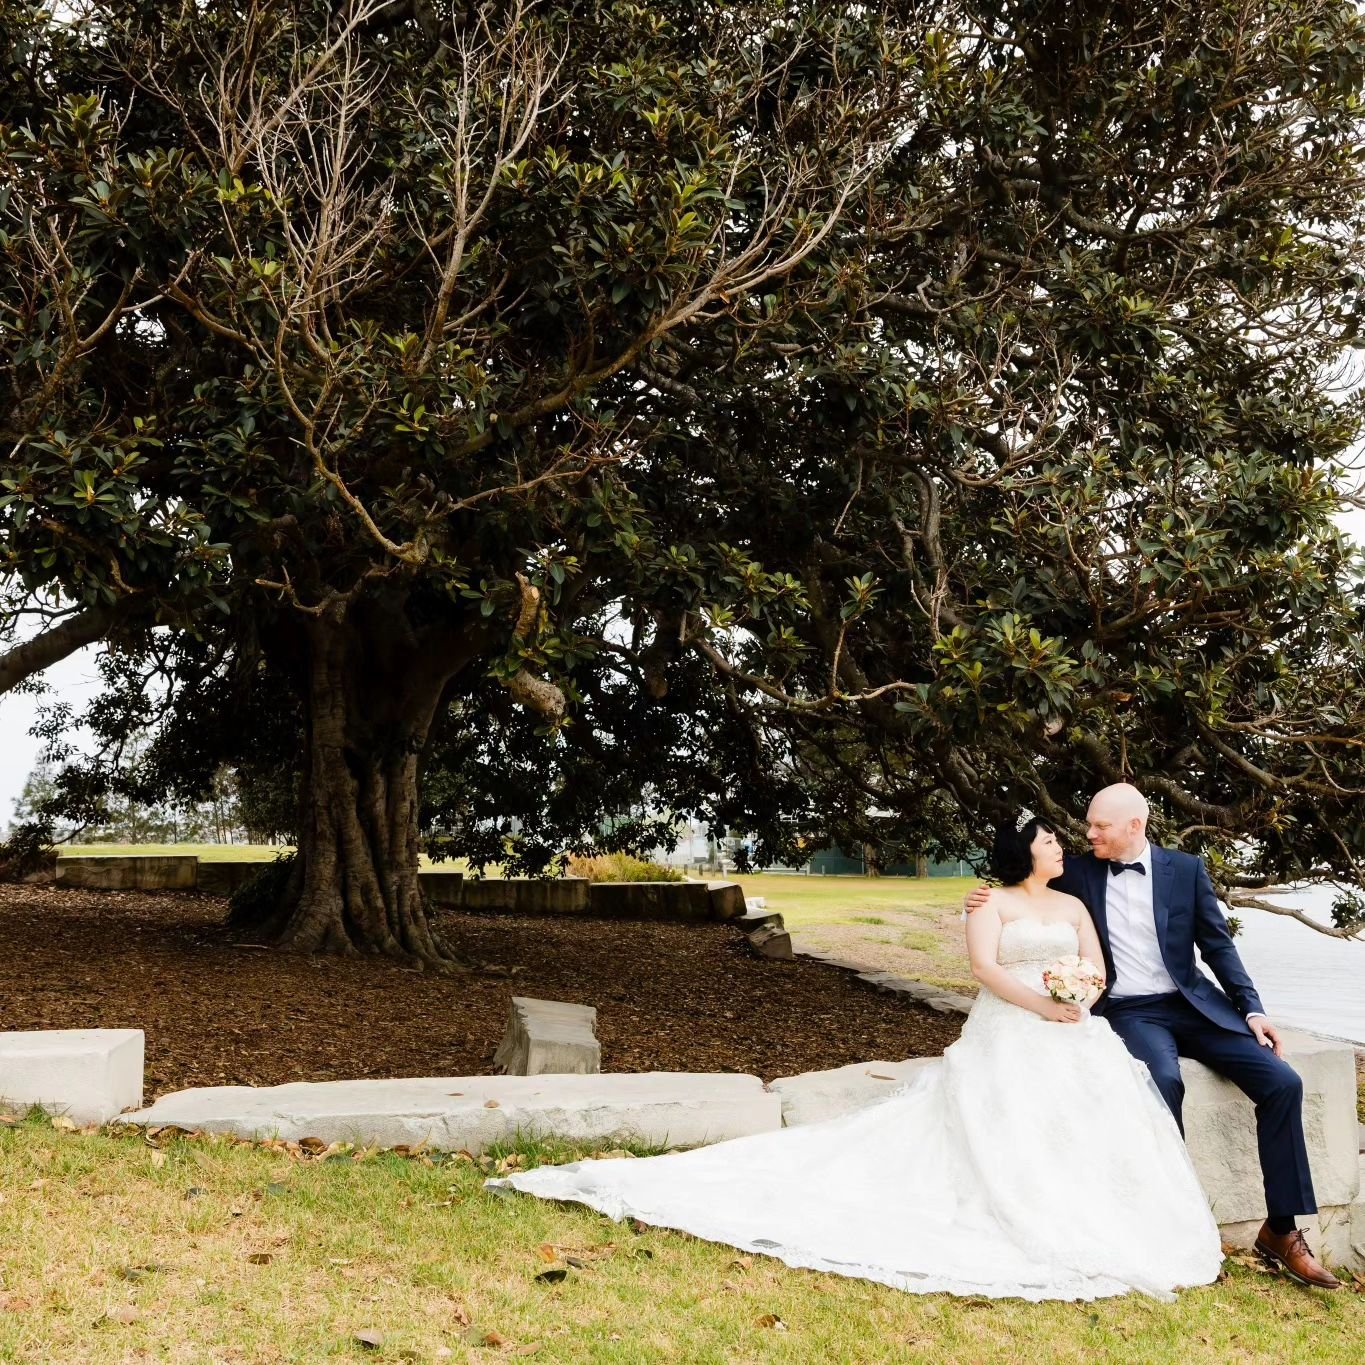 Cam &amp; Joo 😍❤️👇
Cam &amp; Joo held hands and shared their I Do&rsquo;s at the stunning and picturesque Green Point Foreshore Reserve! 
Amongst the beautiful Lake Macquarie and my Favourite tree in the world- they were surrounded by their closest